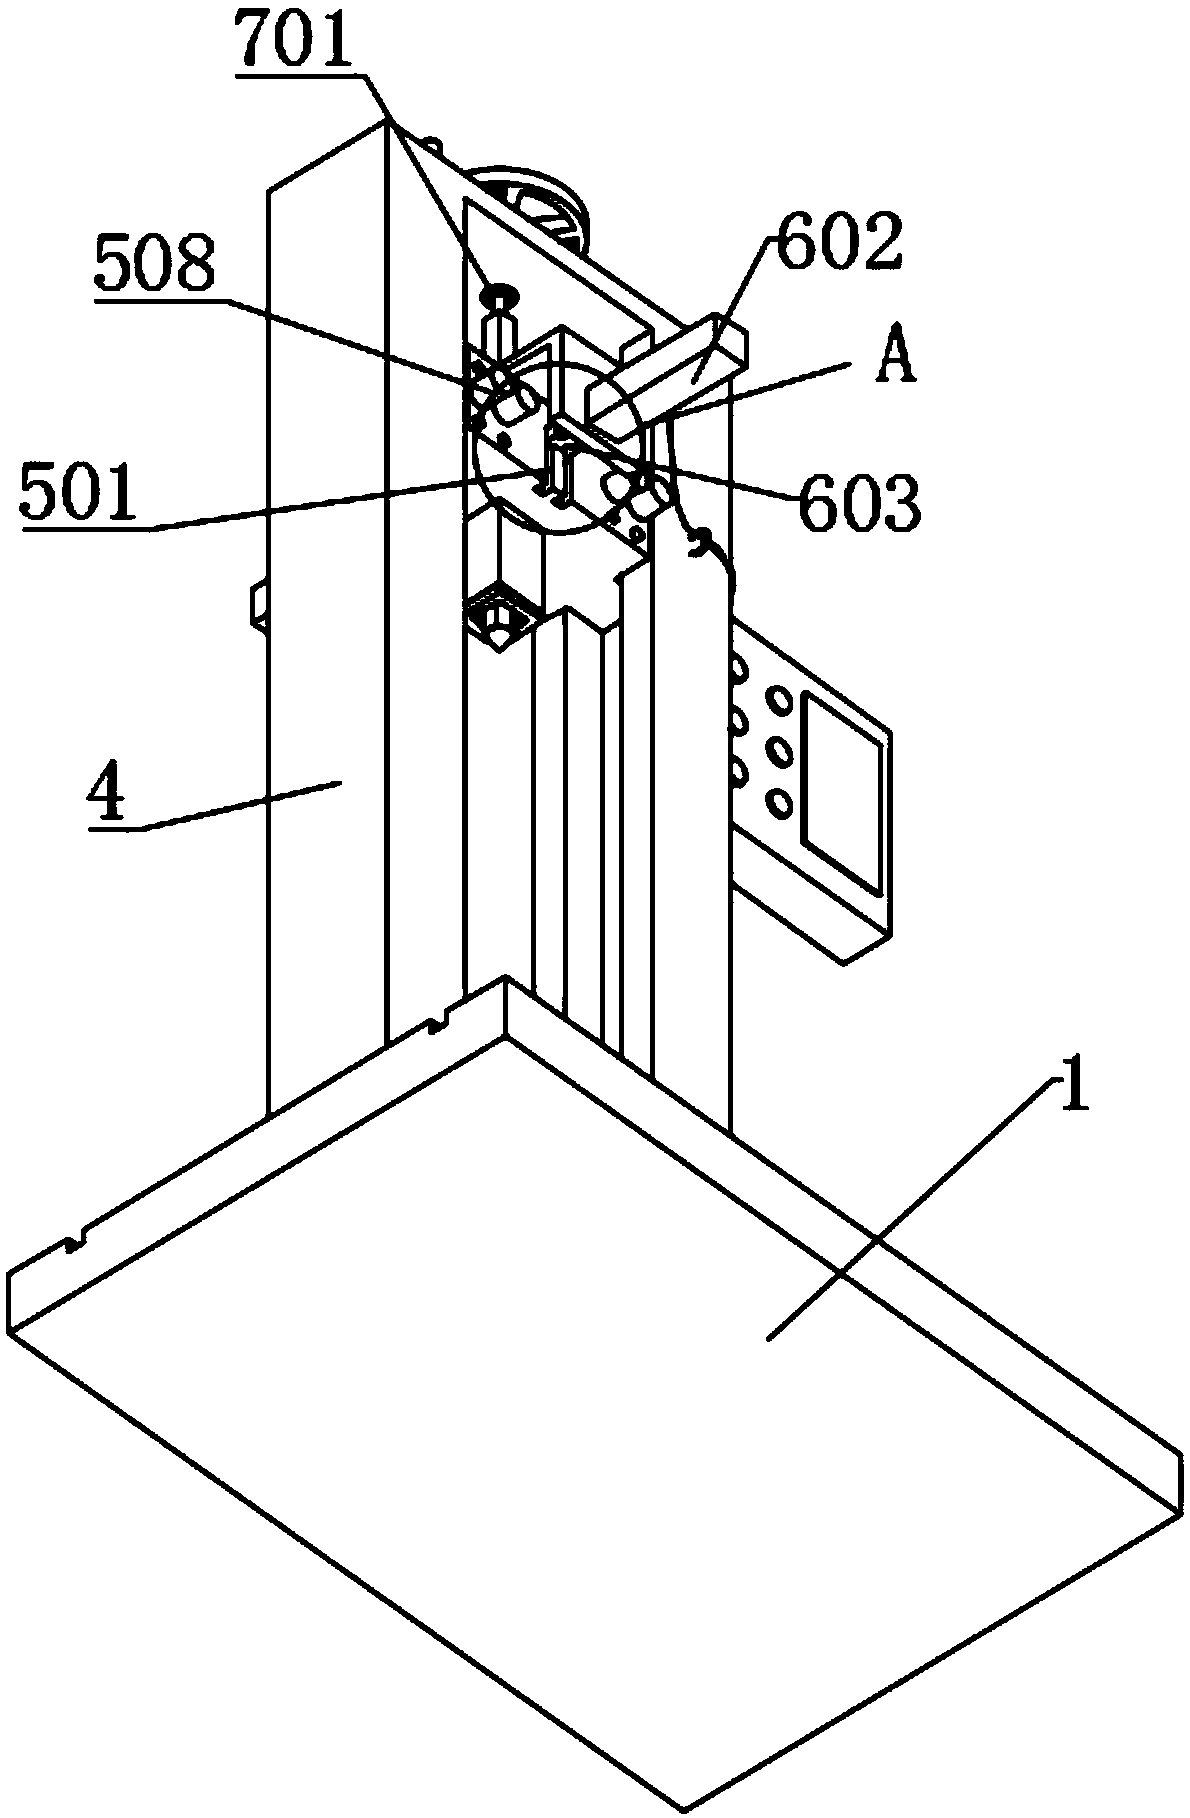 Device used for testing puncture resistance of safety shoes and capable of simulating real situation